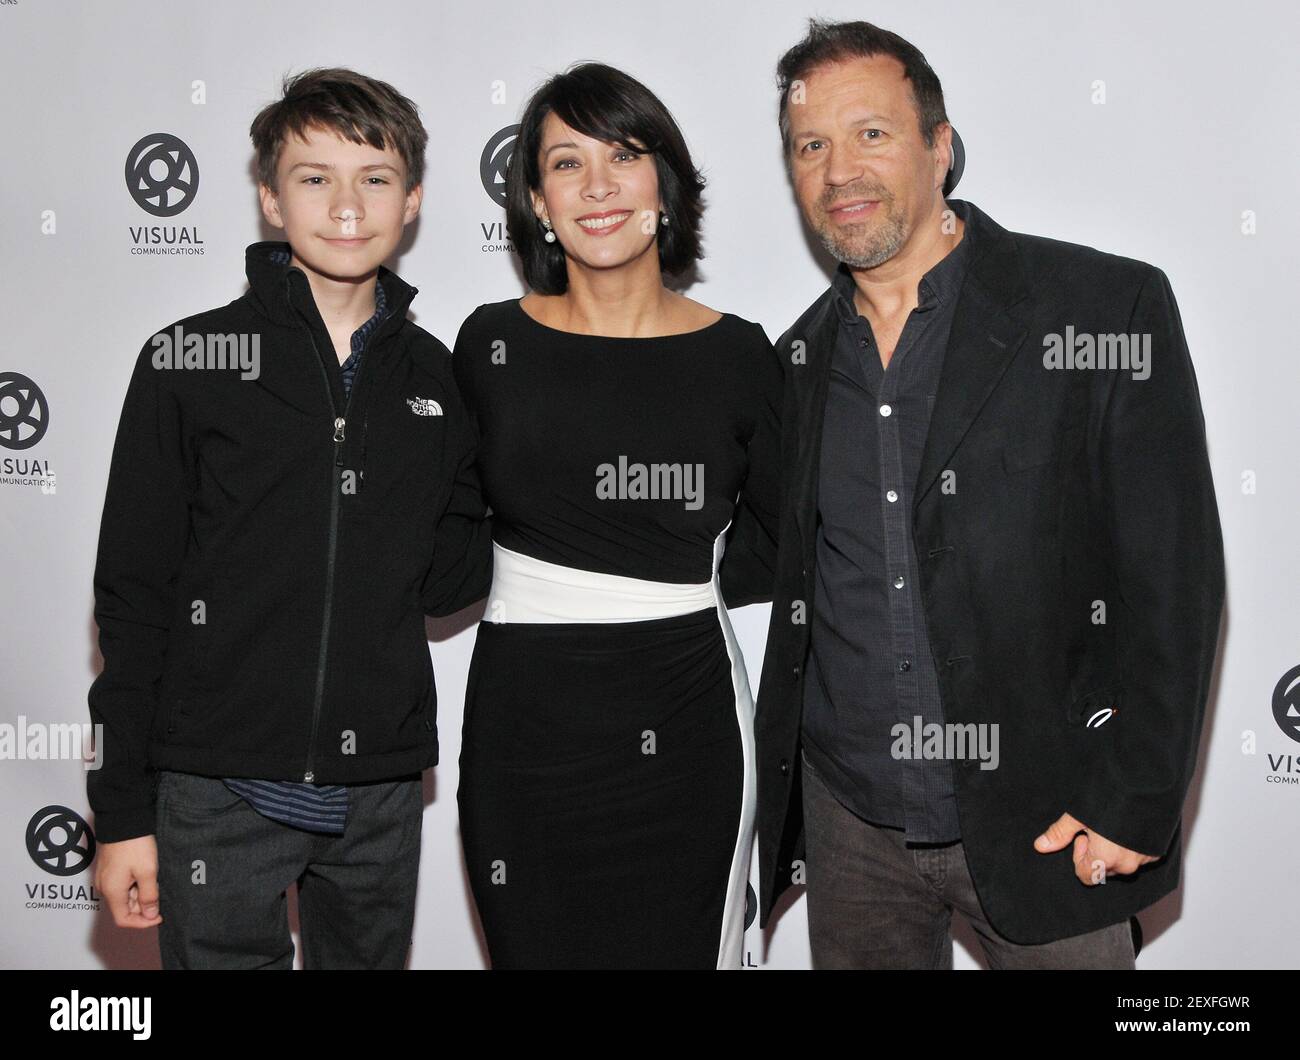 Diana Lee Inosanto (middle), with Son & Husband Ron Balicki at CELEBRATING  BRUCE LEE: An Intimate Evening with Shannon Lee & Diana Lee Inosanto held  at the Japanese American National Museum in